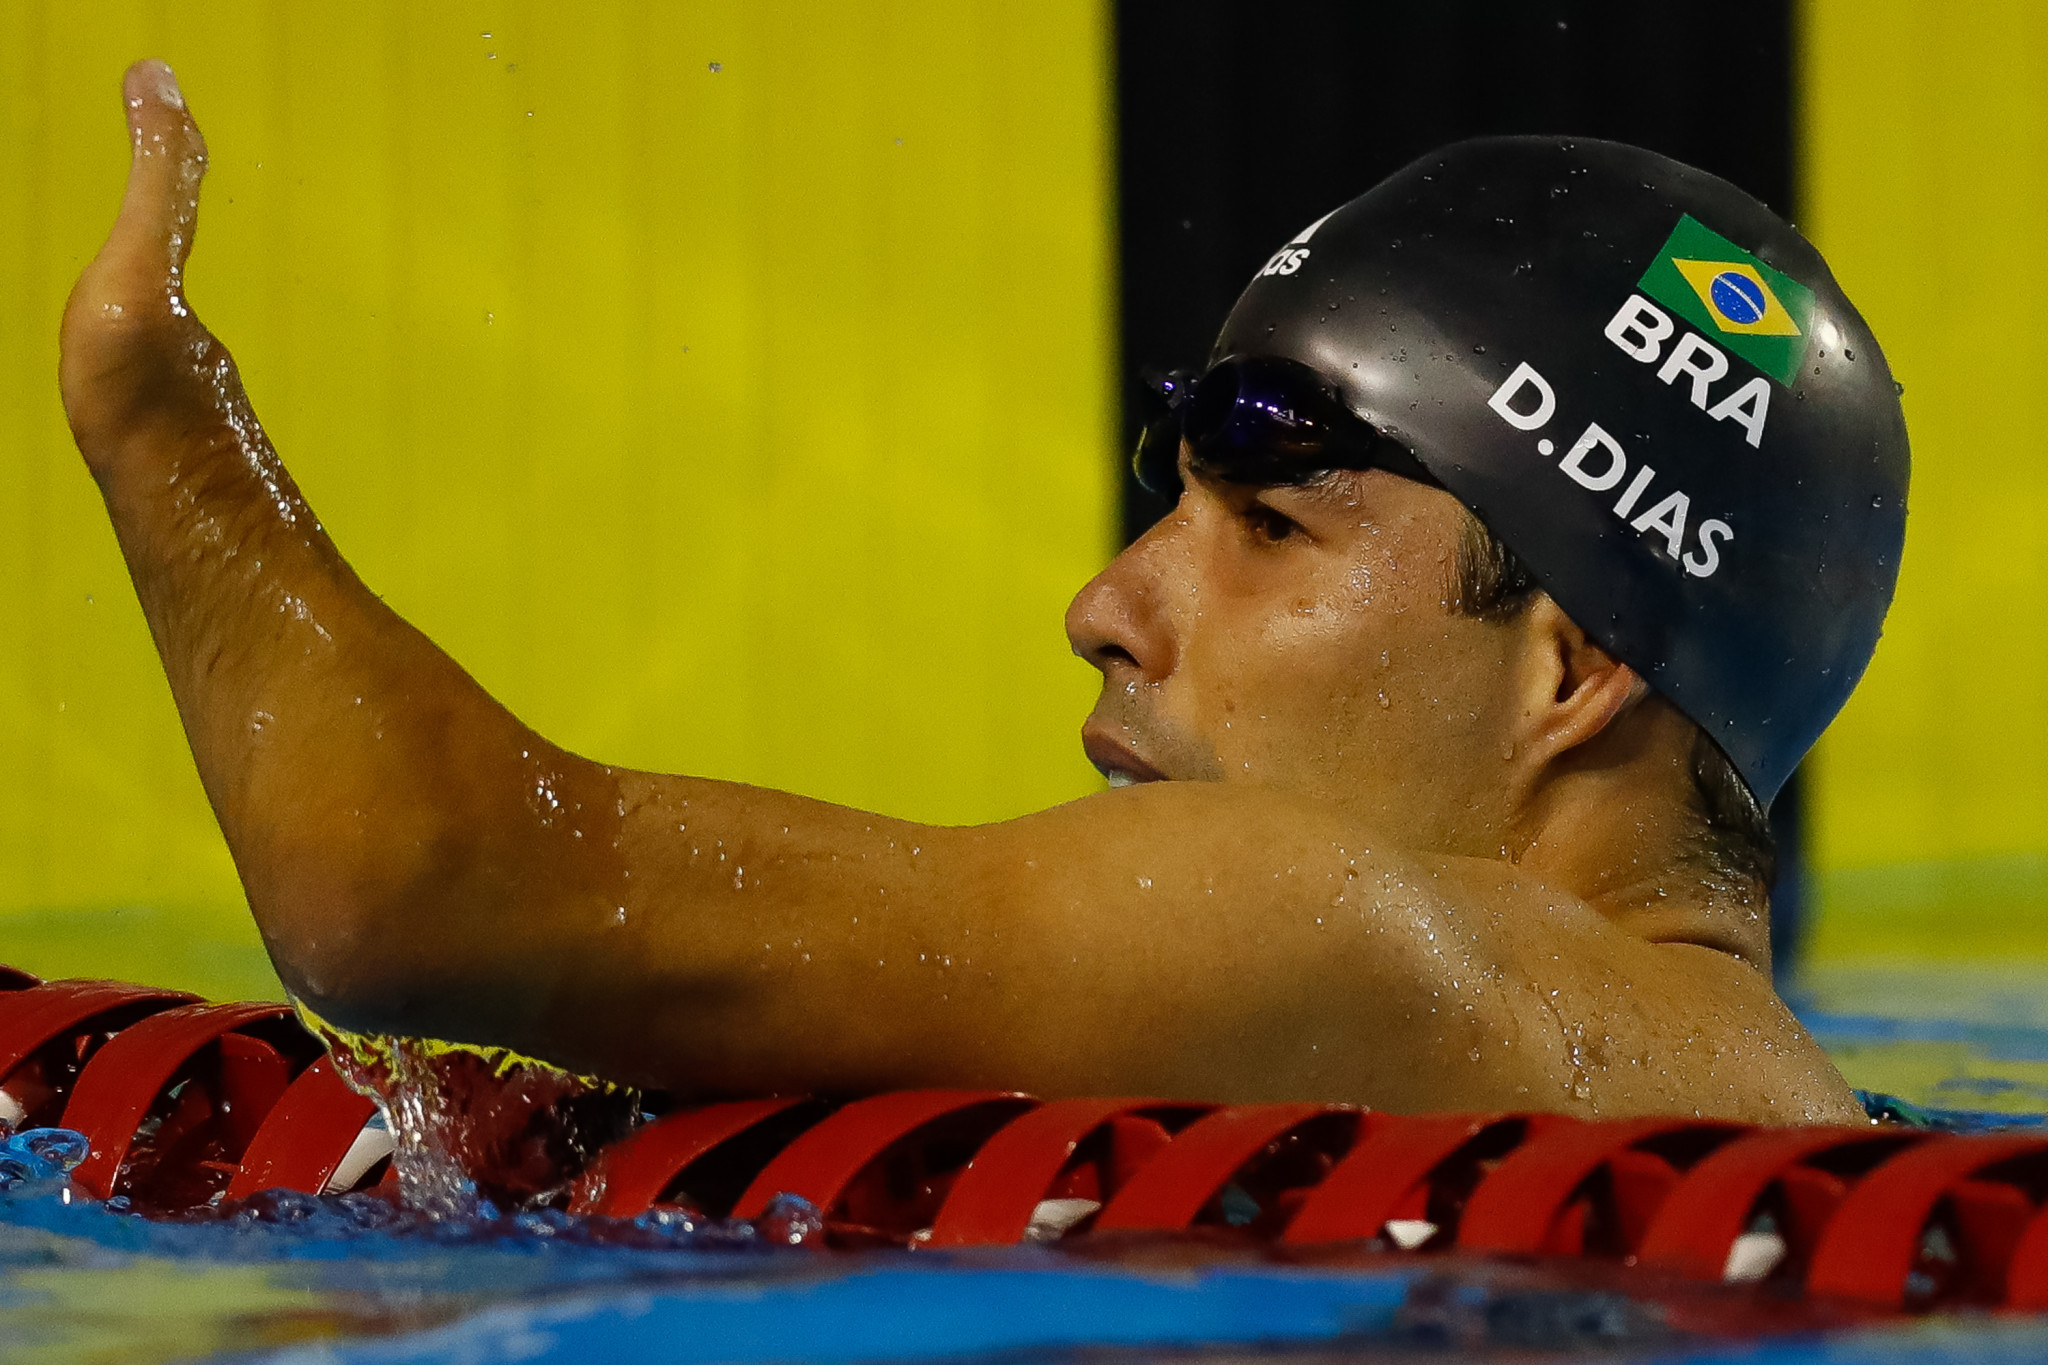 Paralympic legend Dias clinches second gold on final day of World Para Swimming World Series